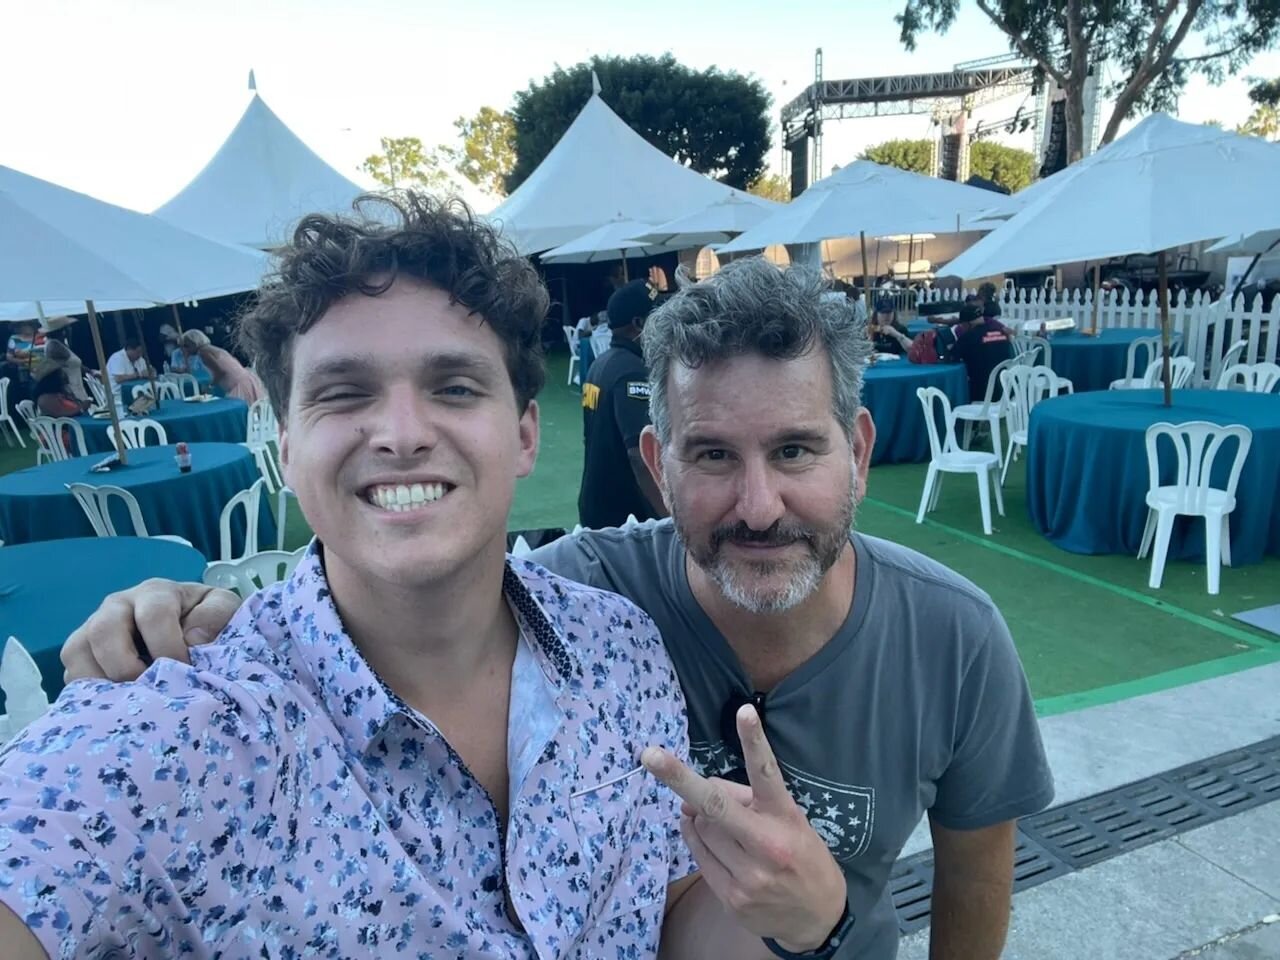 Awesome end to a productive week in LA with @jackfanselau connecting with @dameesco and seeing him,  @kandacesprings and @ericdarius perform at @longbeachjazzfestival . Thanks to @simondiamondsez for connecting the dots!